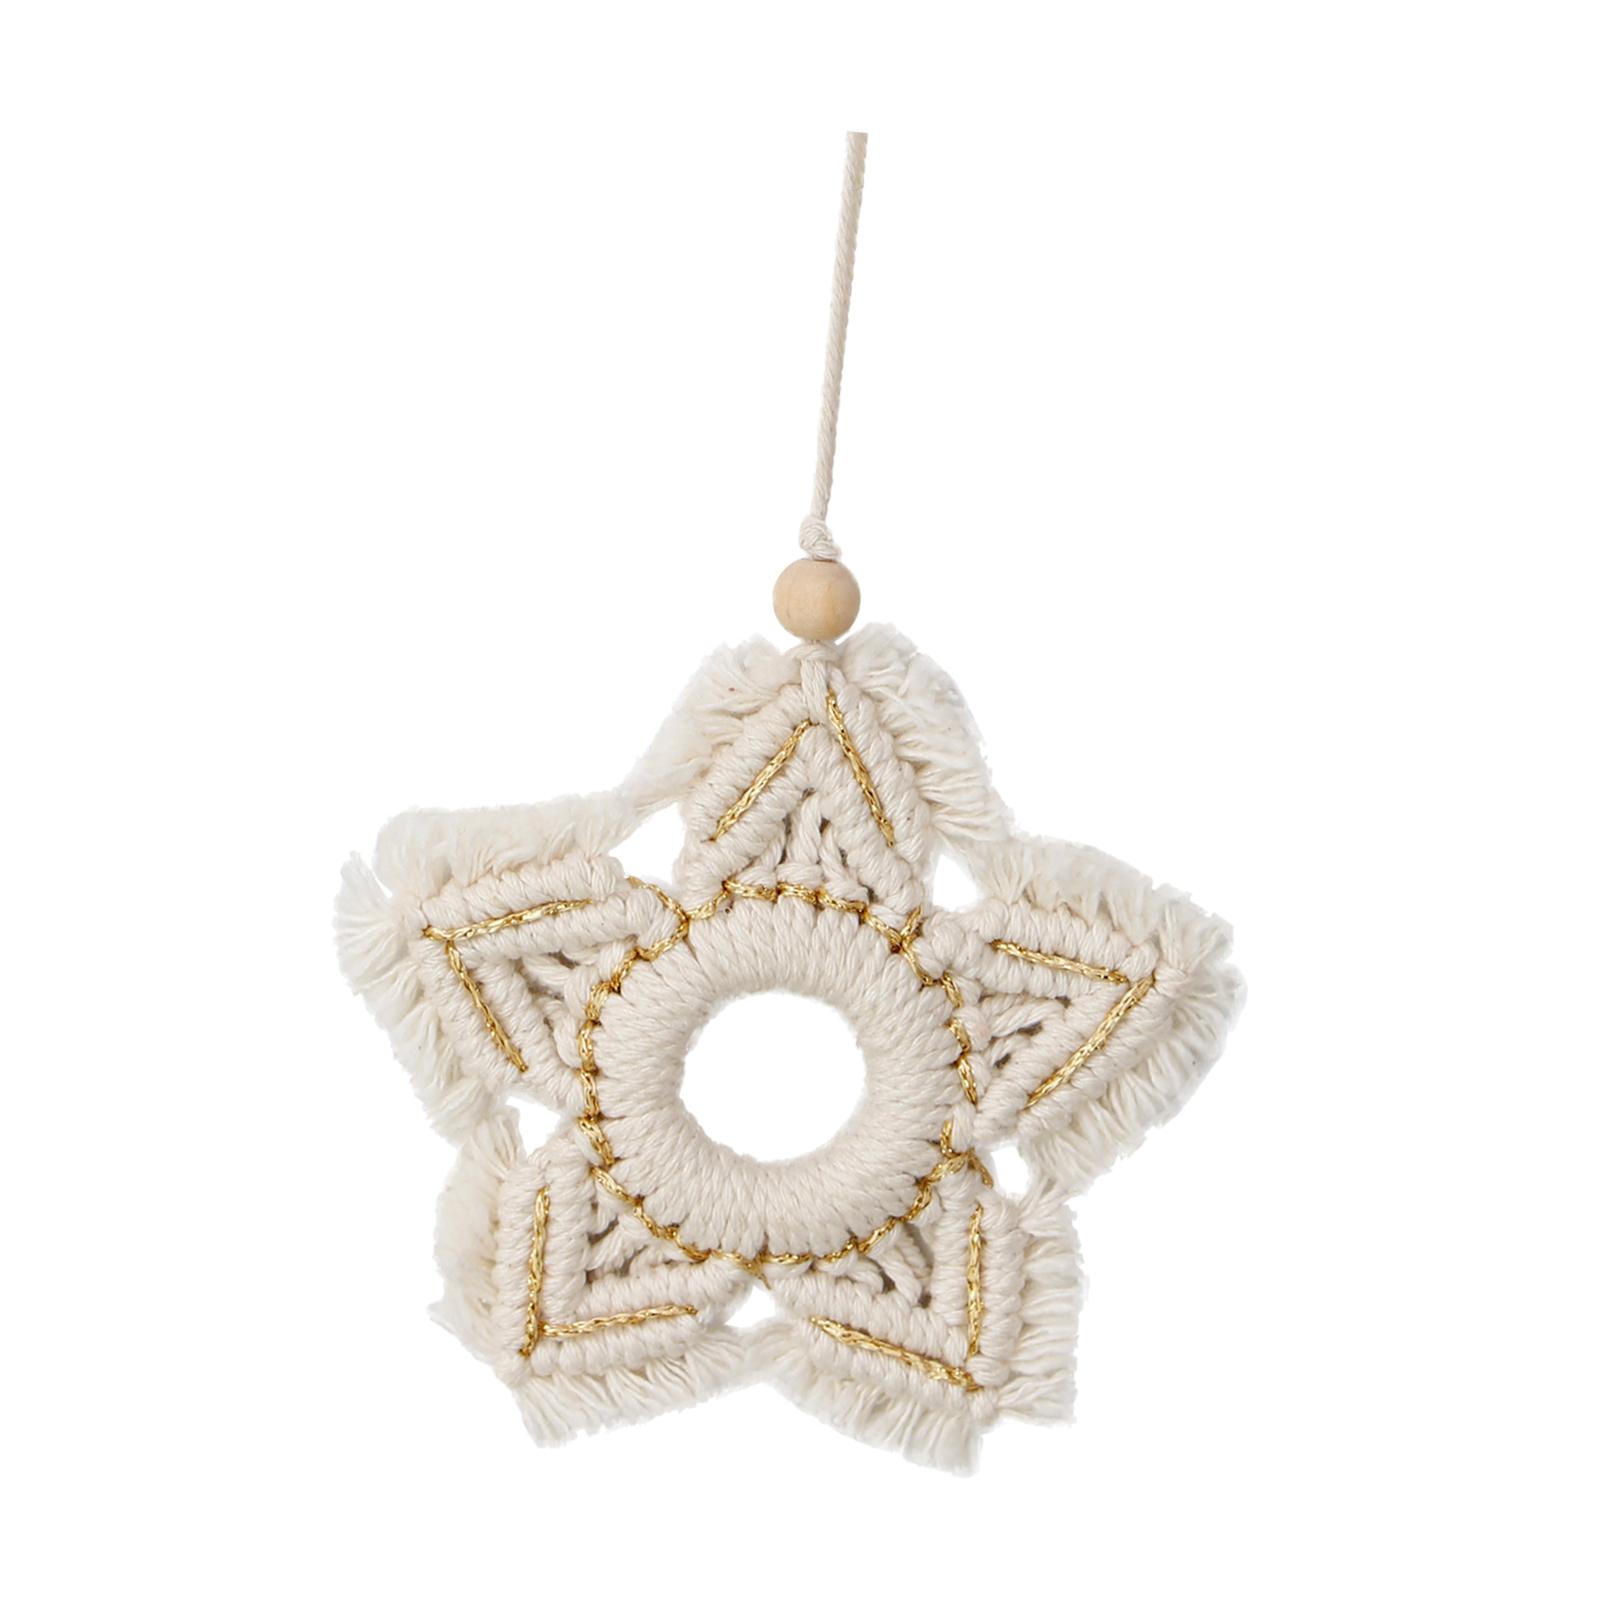 Woven Christmas Hanging Ornament Star Decoration Snowflake for New Year